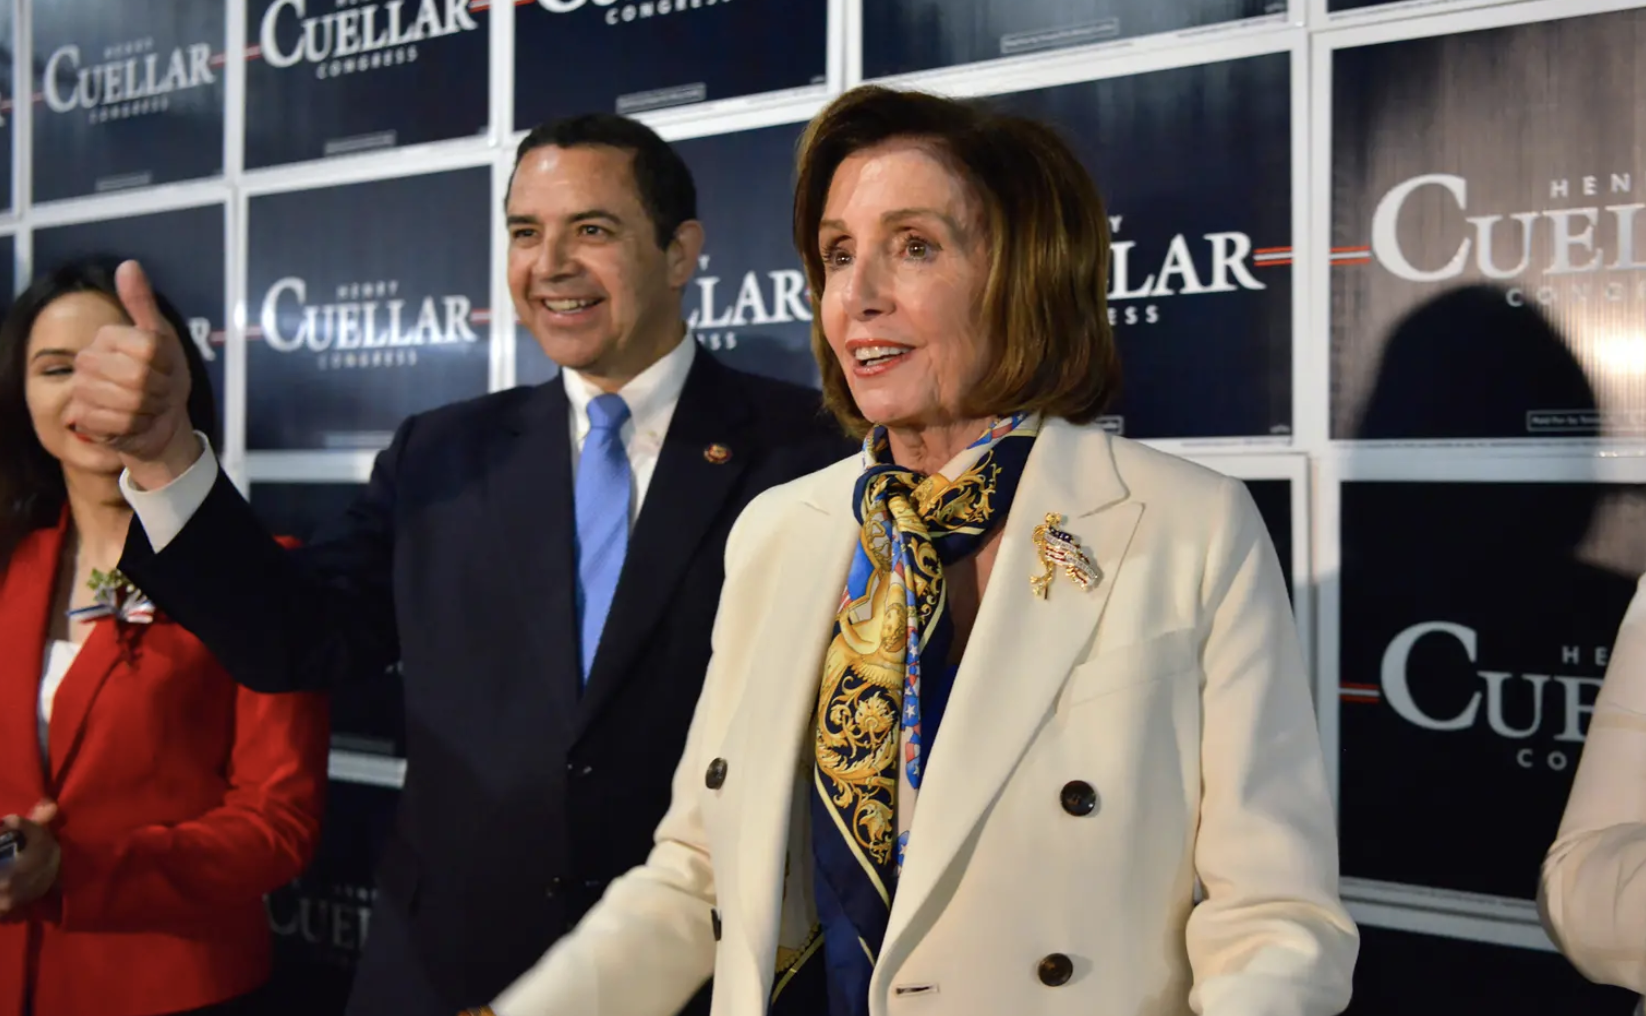 Nancy Pelosi at a campaign event for Henry Cuellar in 2020. Cuellar stands behind Pelosi giving a thumbs up